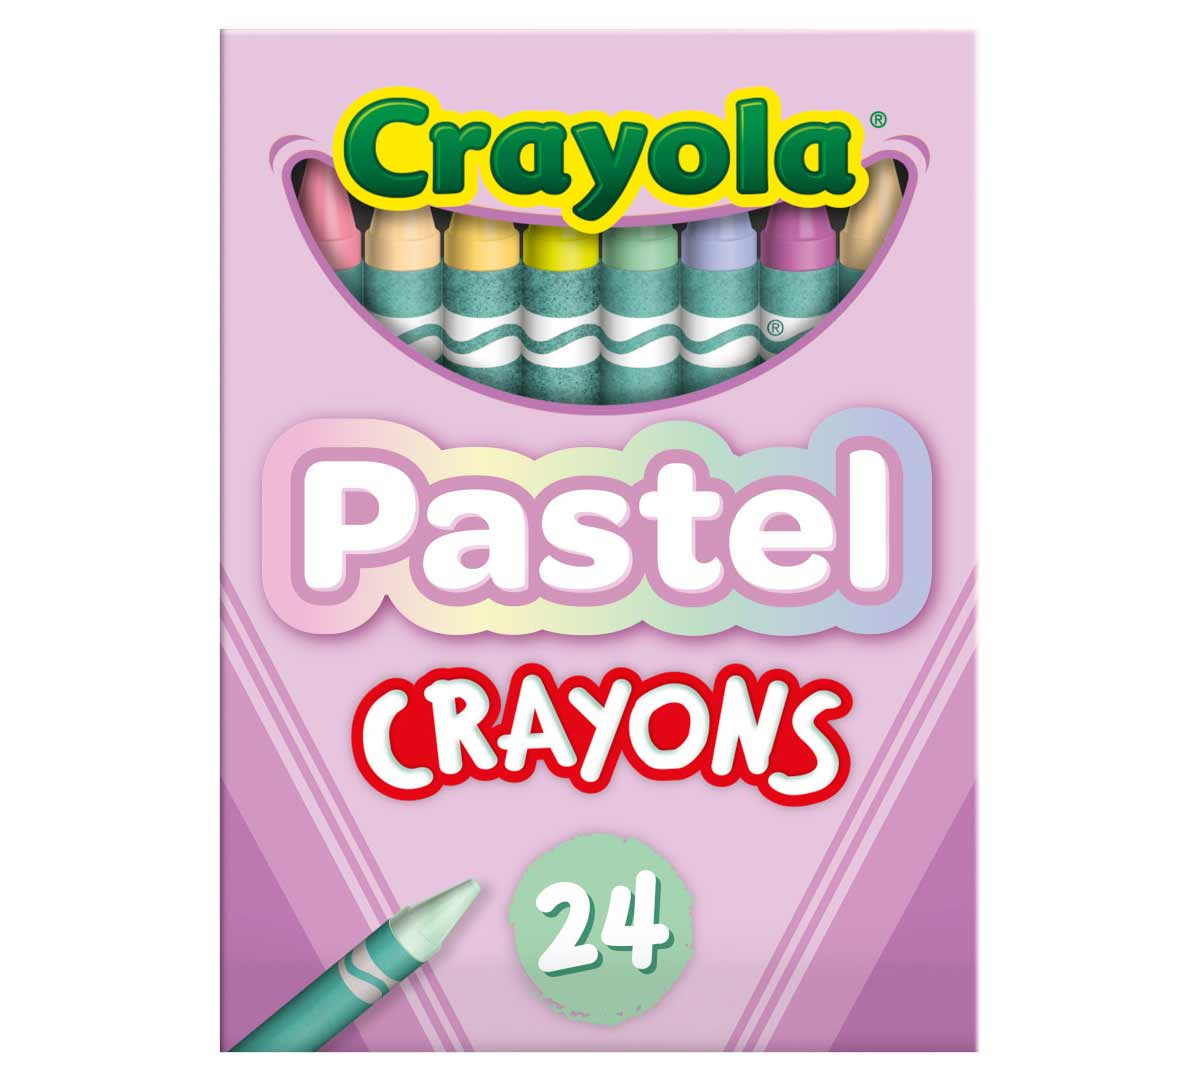 Pretty Pink on crayola.com  Pink, Pretty in pink, Pink box